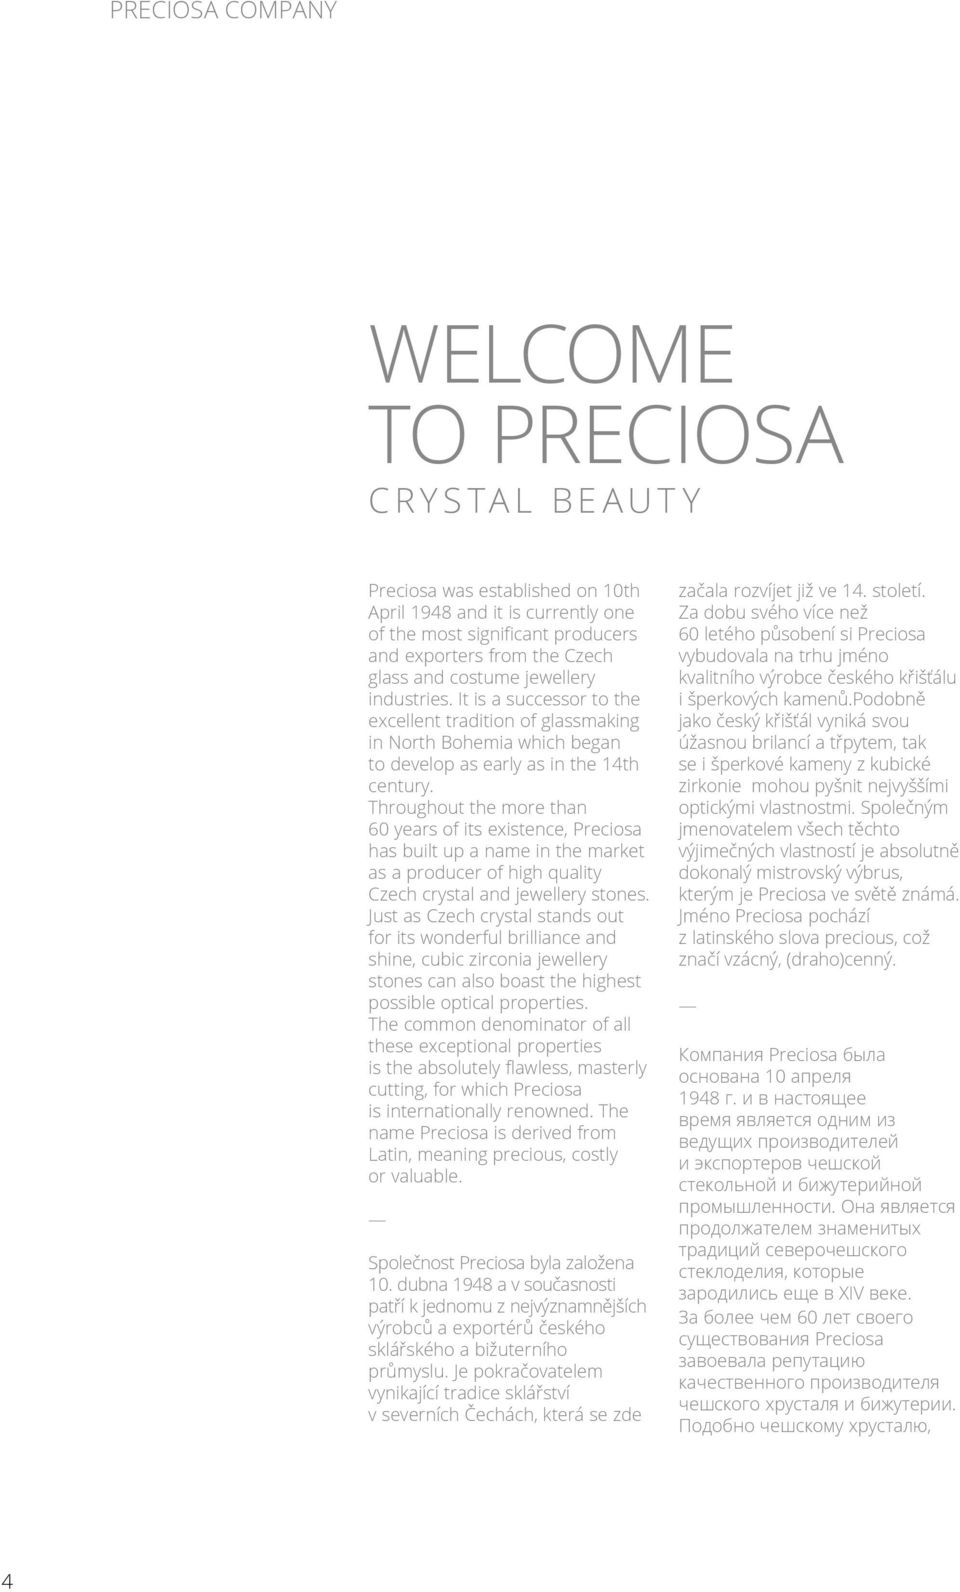 Throughout the more than 60 years of its existence, Preciosa has built up a name in the market as a producer of high quality Czech crystal and jewellery stones.